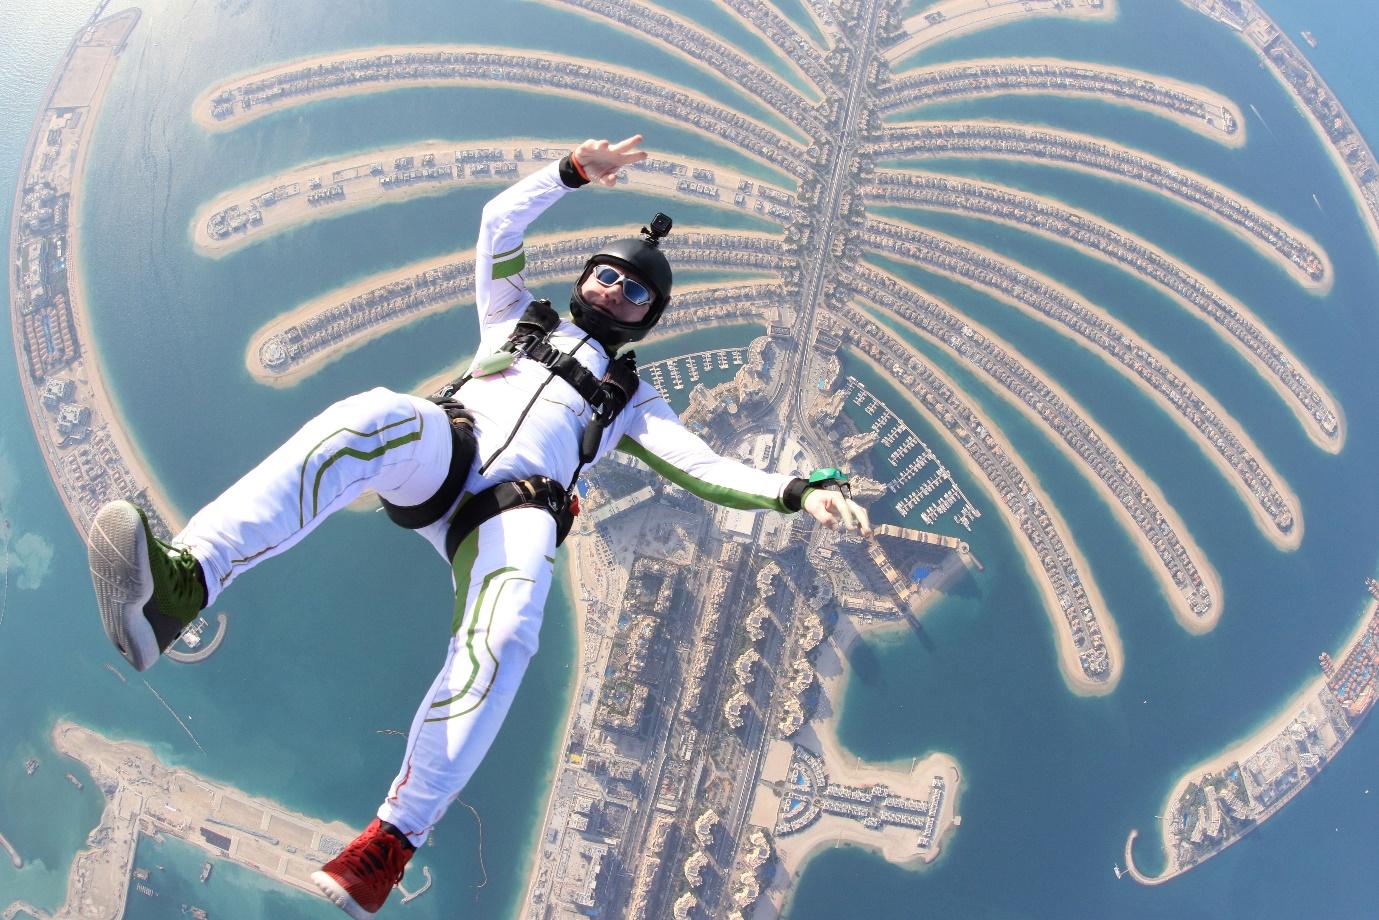 A person skydiving over a city

Description automatically generated